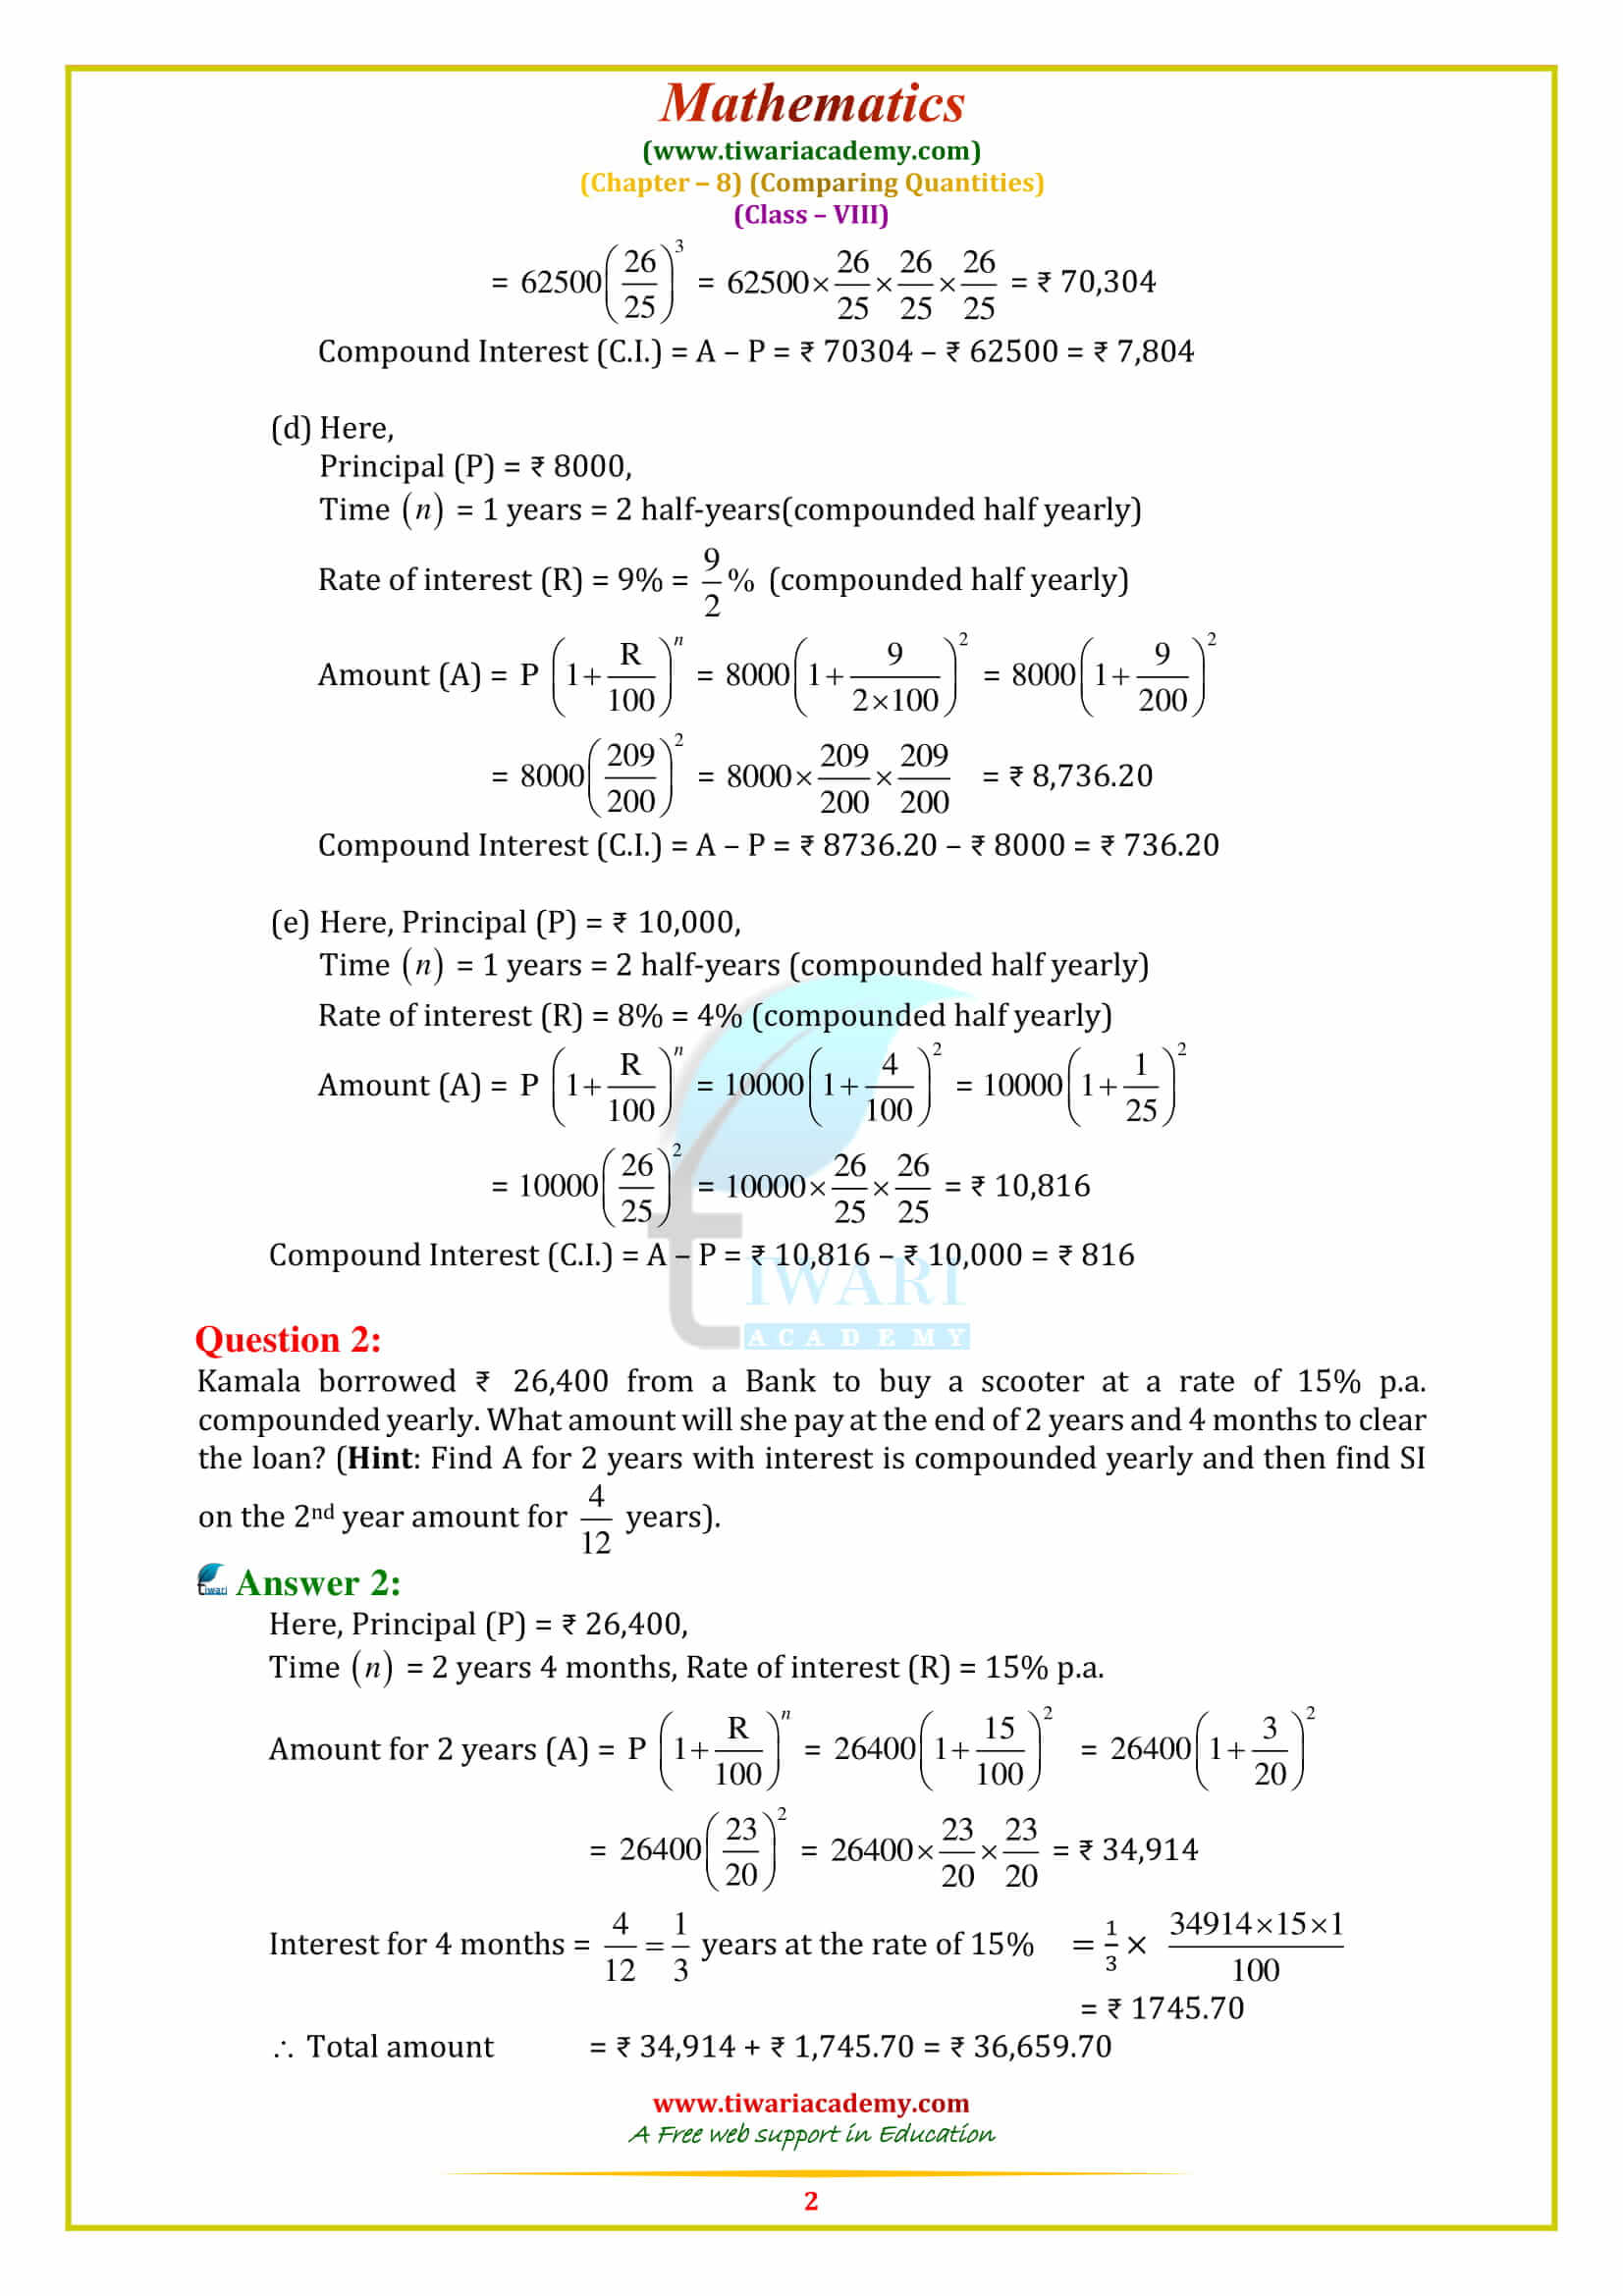 NCERT Solutions for Class 8 Maths Chapter 8 Exercise 8.3 in pdf form